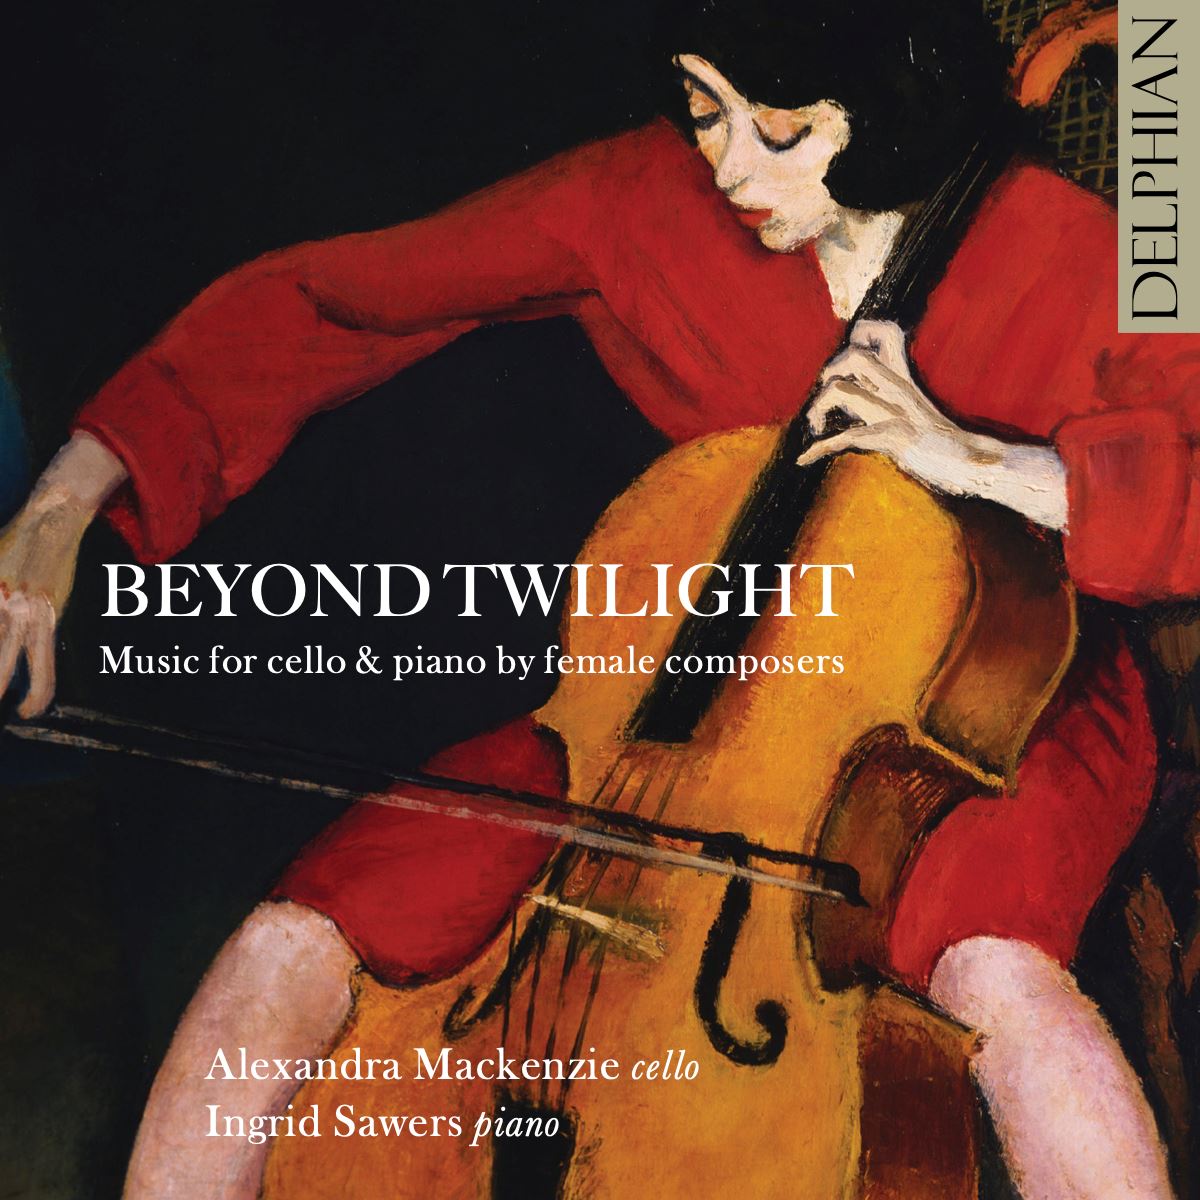 Beyond Twilight: Music for cello & piano by female composers Delphian Records